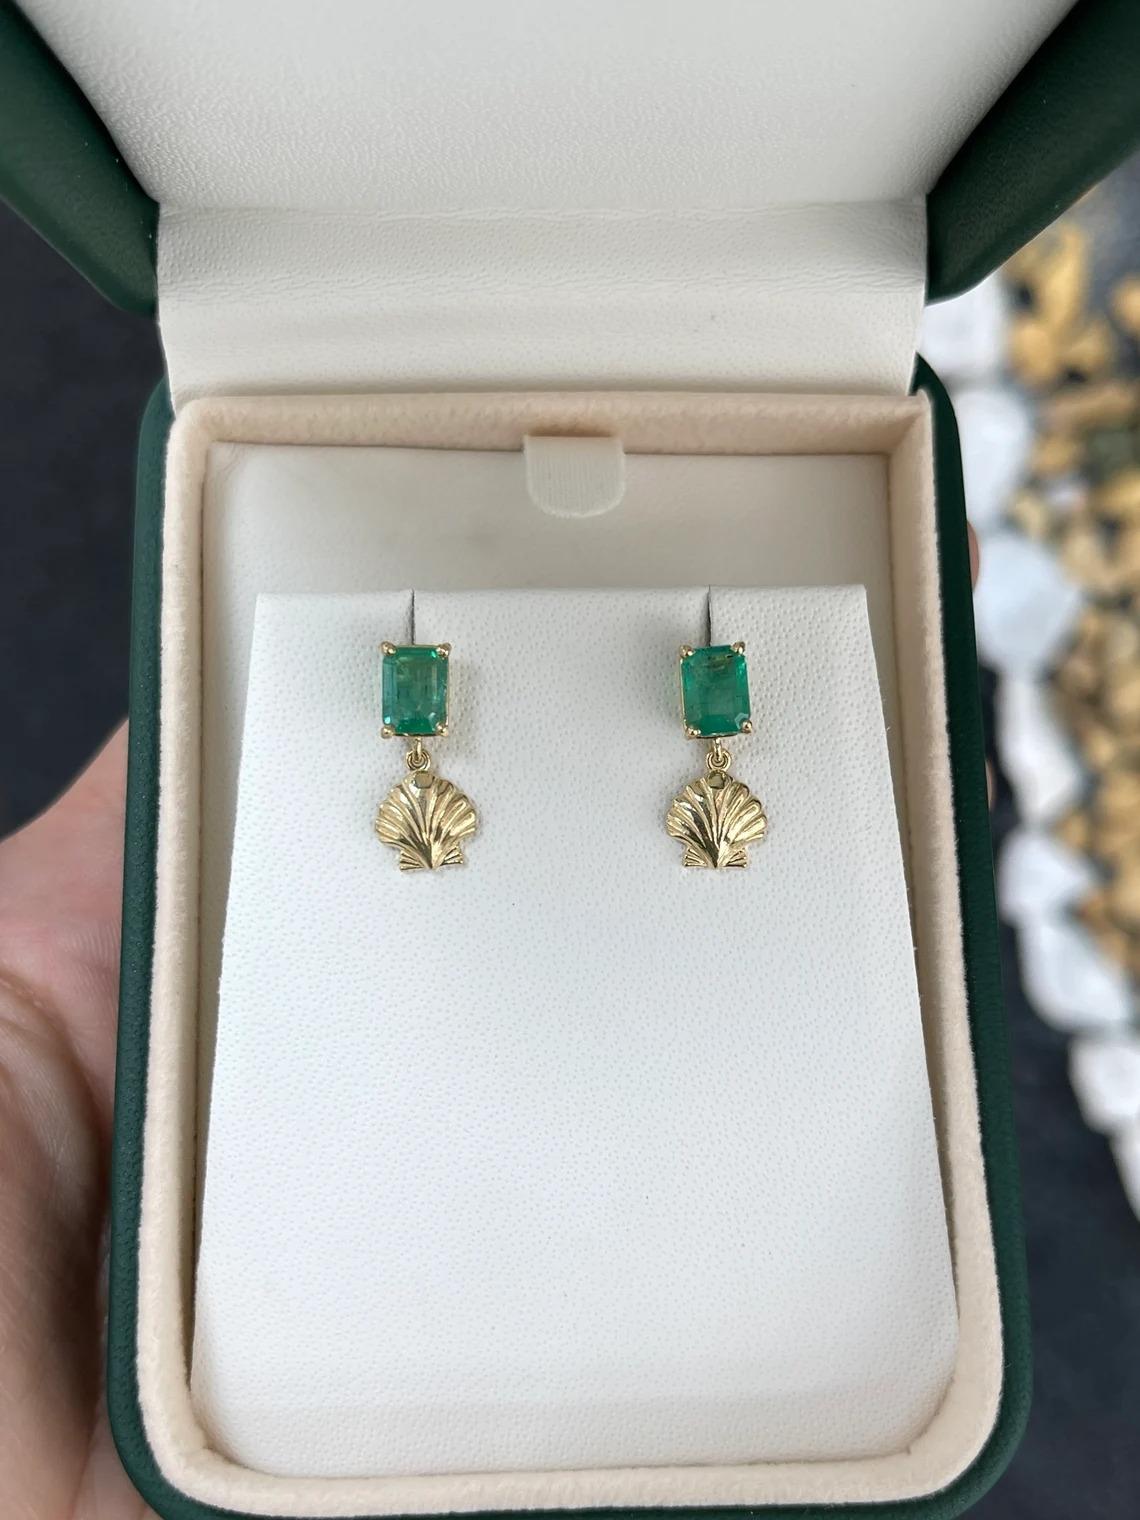 These stunning emerald stud earrings feature natural emeralds with lush green color and beautiful characteristics. The emeralds are expertly cut in an emerald cut style and securely set in a four-prong basket setting, showcasing their brilliance.